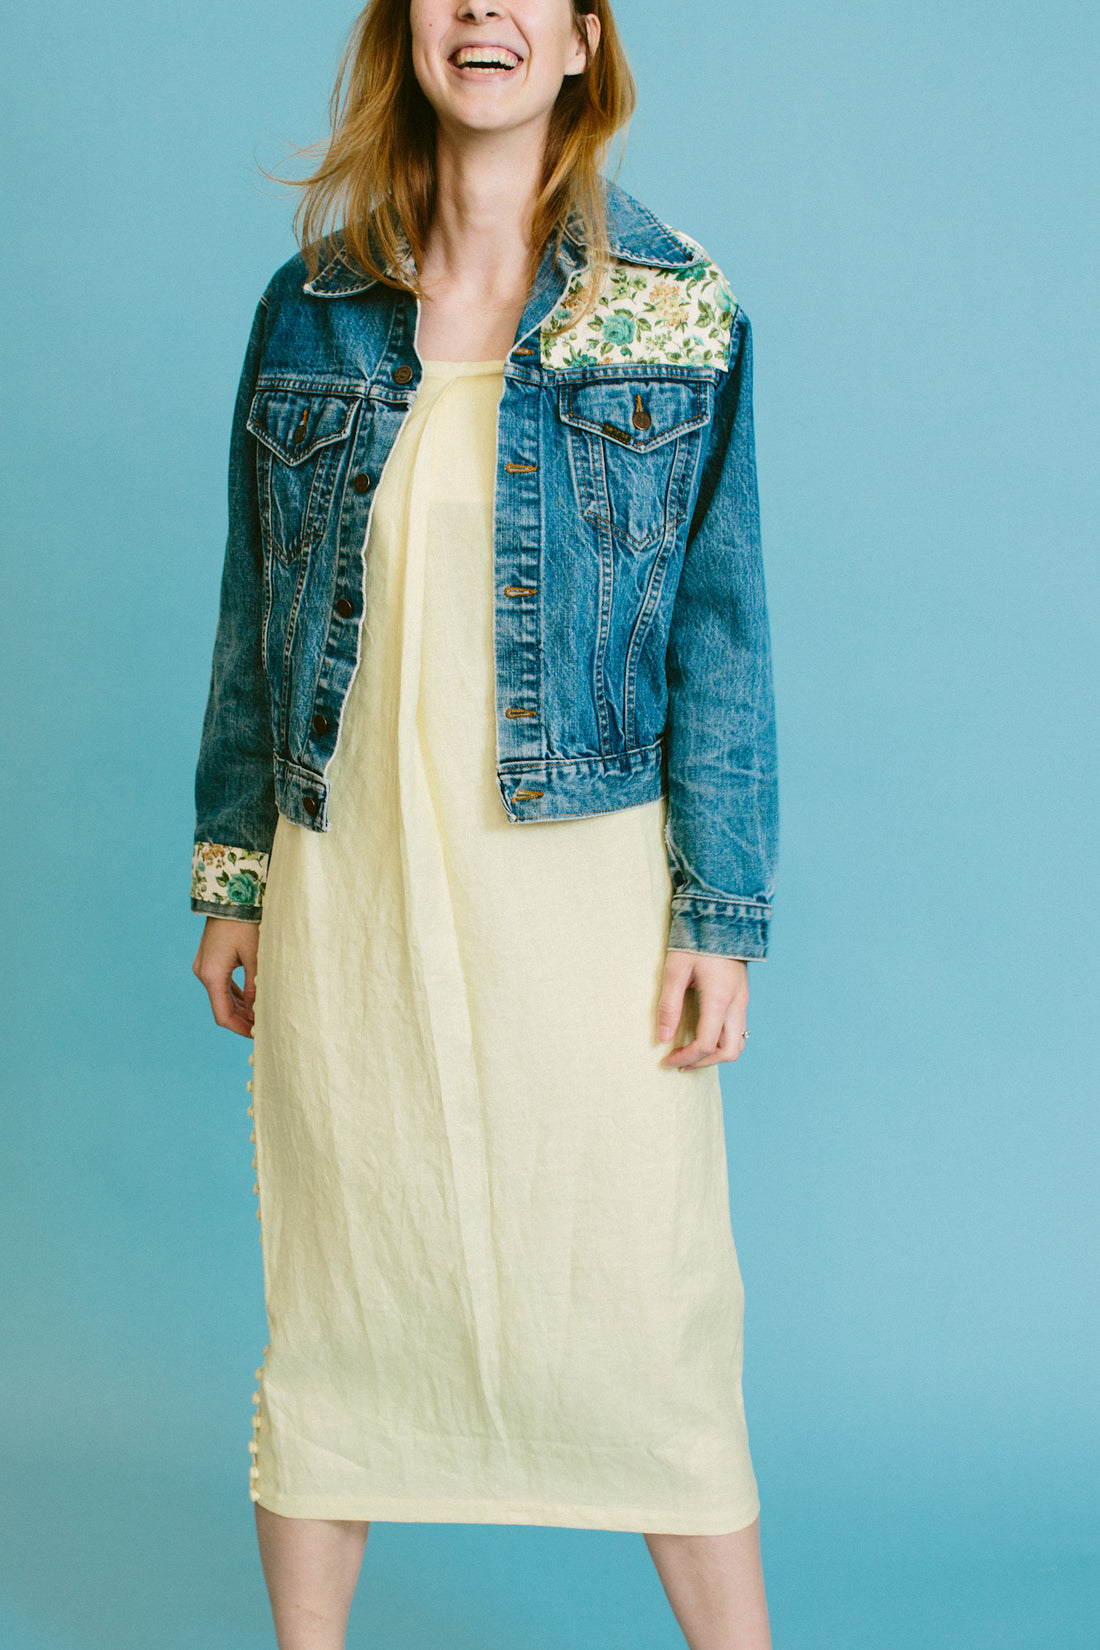 maggie wears the ajaie alaie full moon dress with a one-of-a-kind upcycled quilted denim jacket  | a basic shop